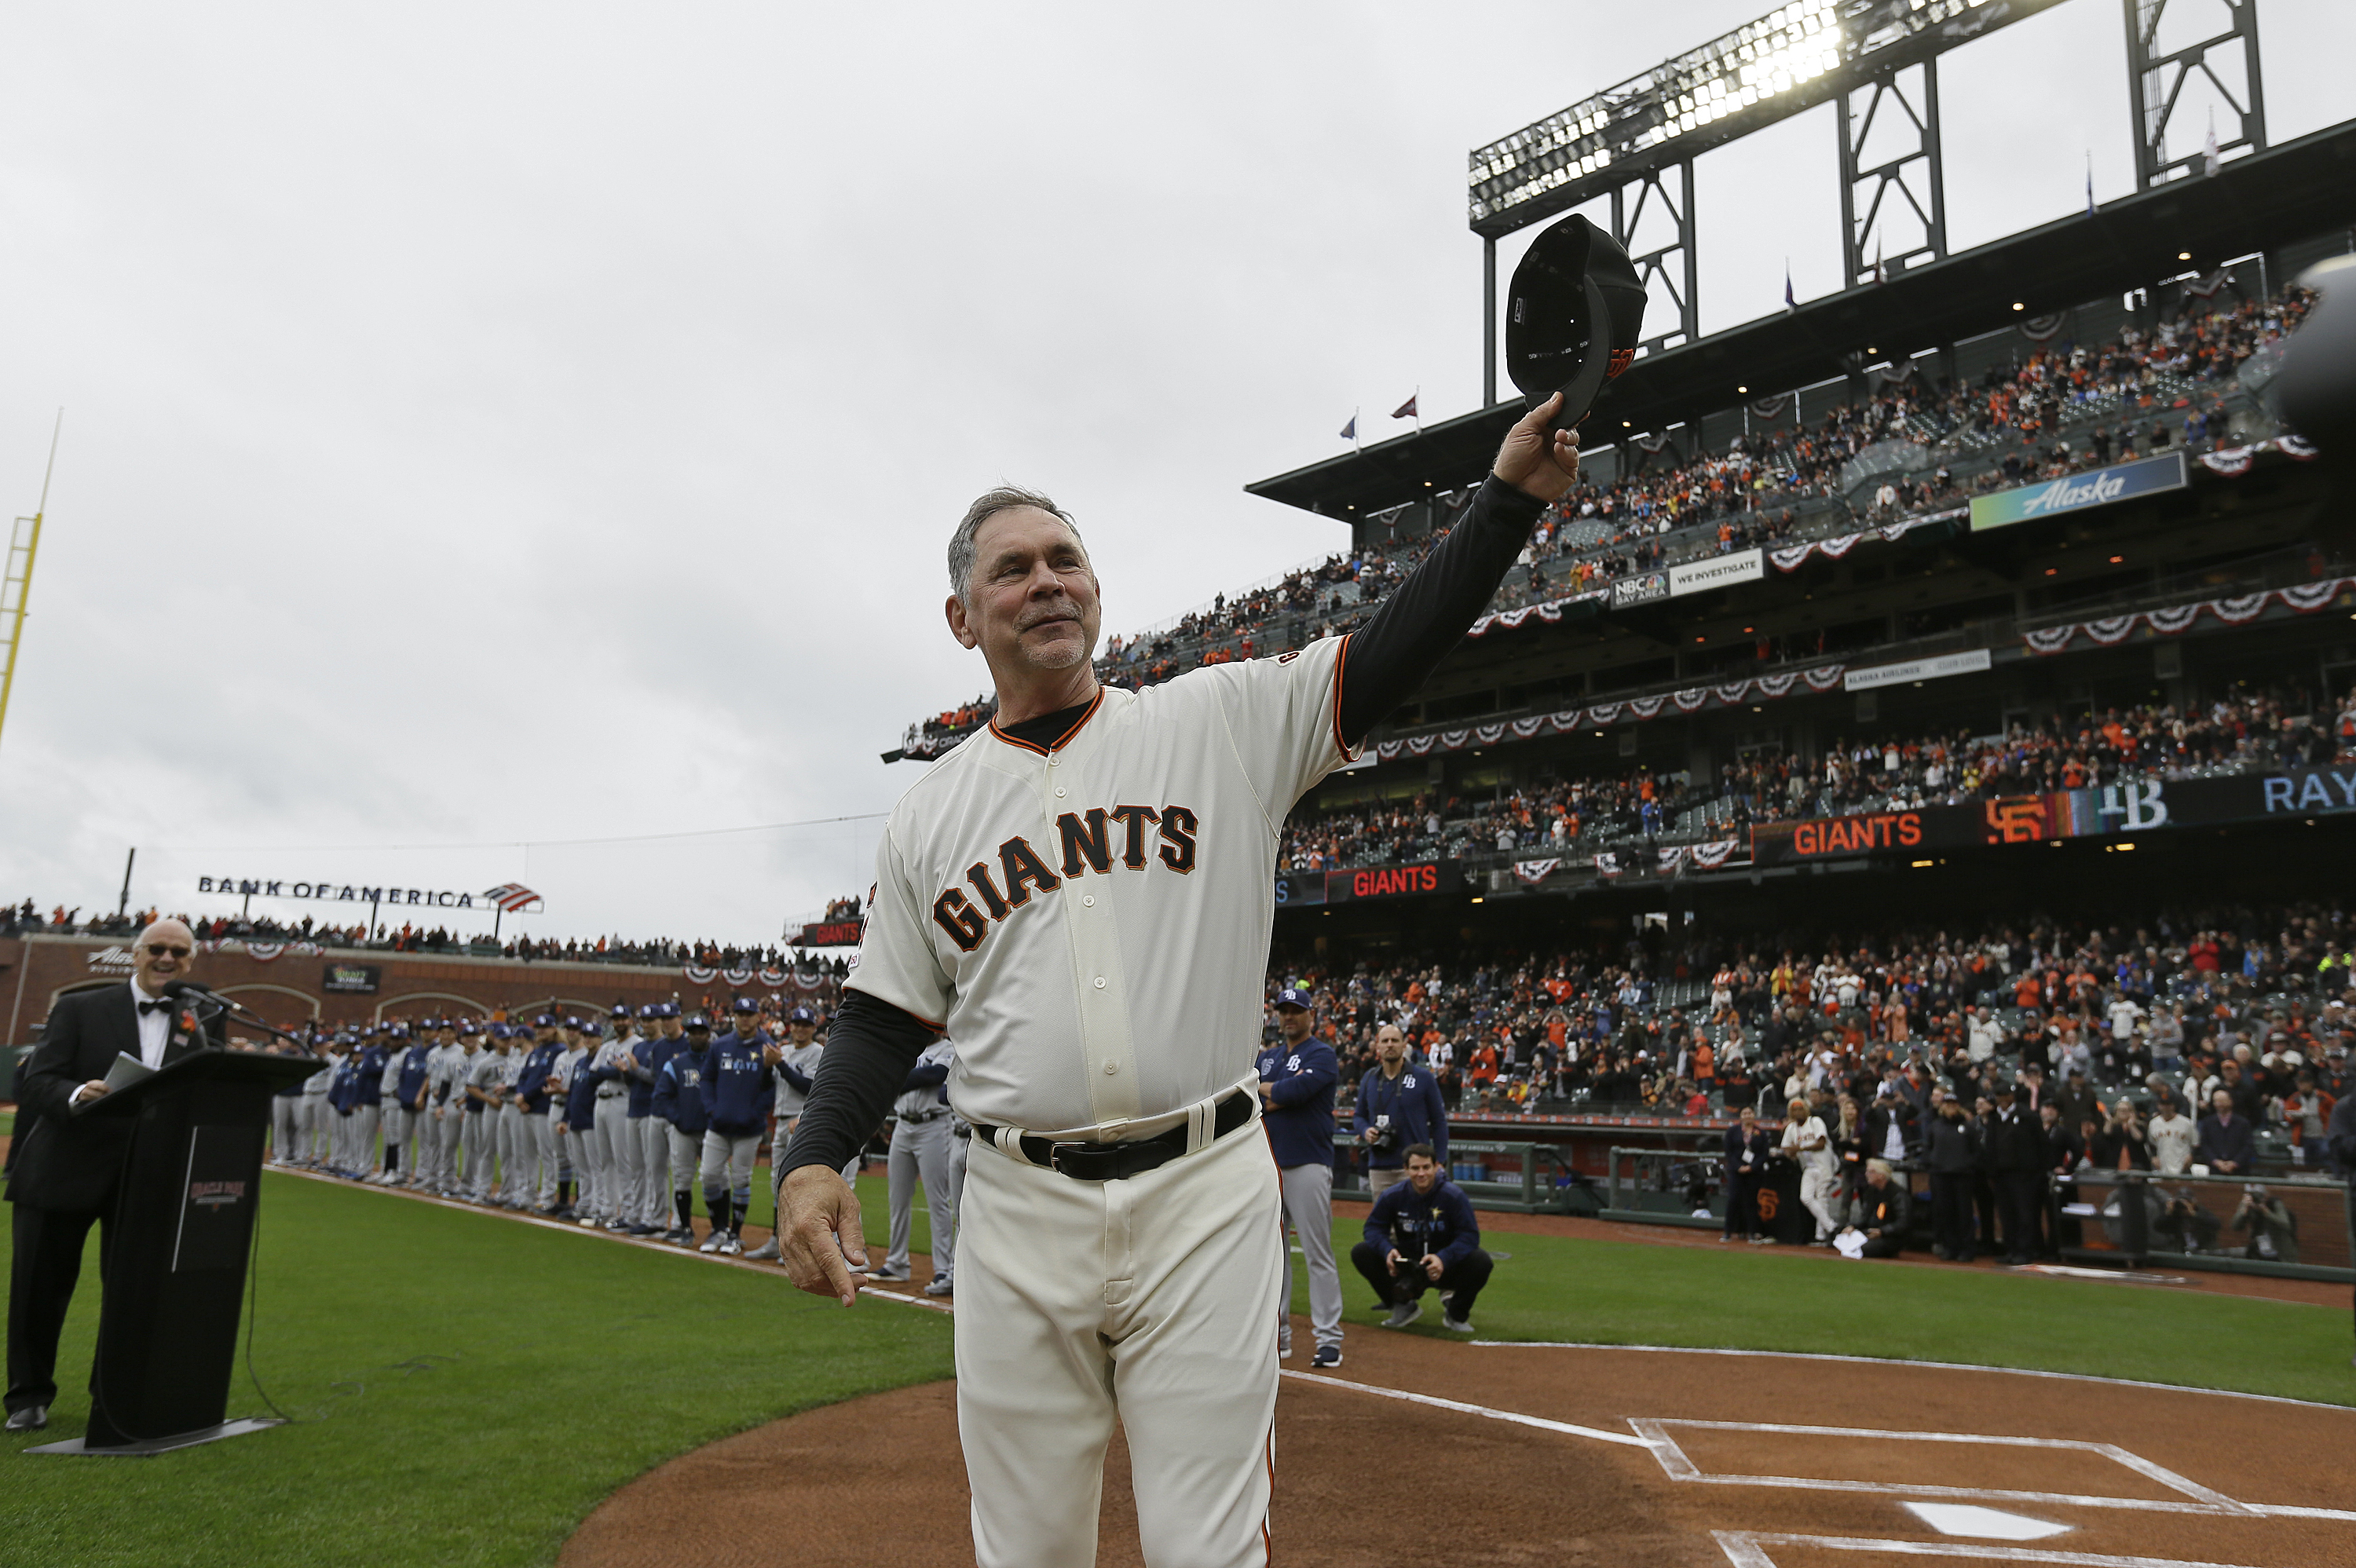 Giants' Bruce Bochy prepares to exit after respected career